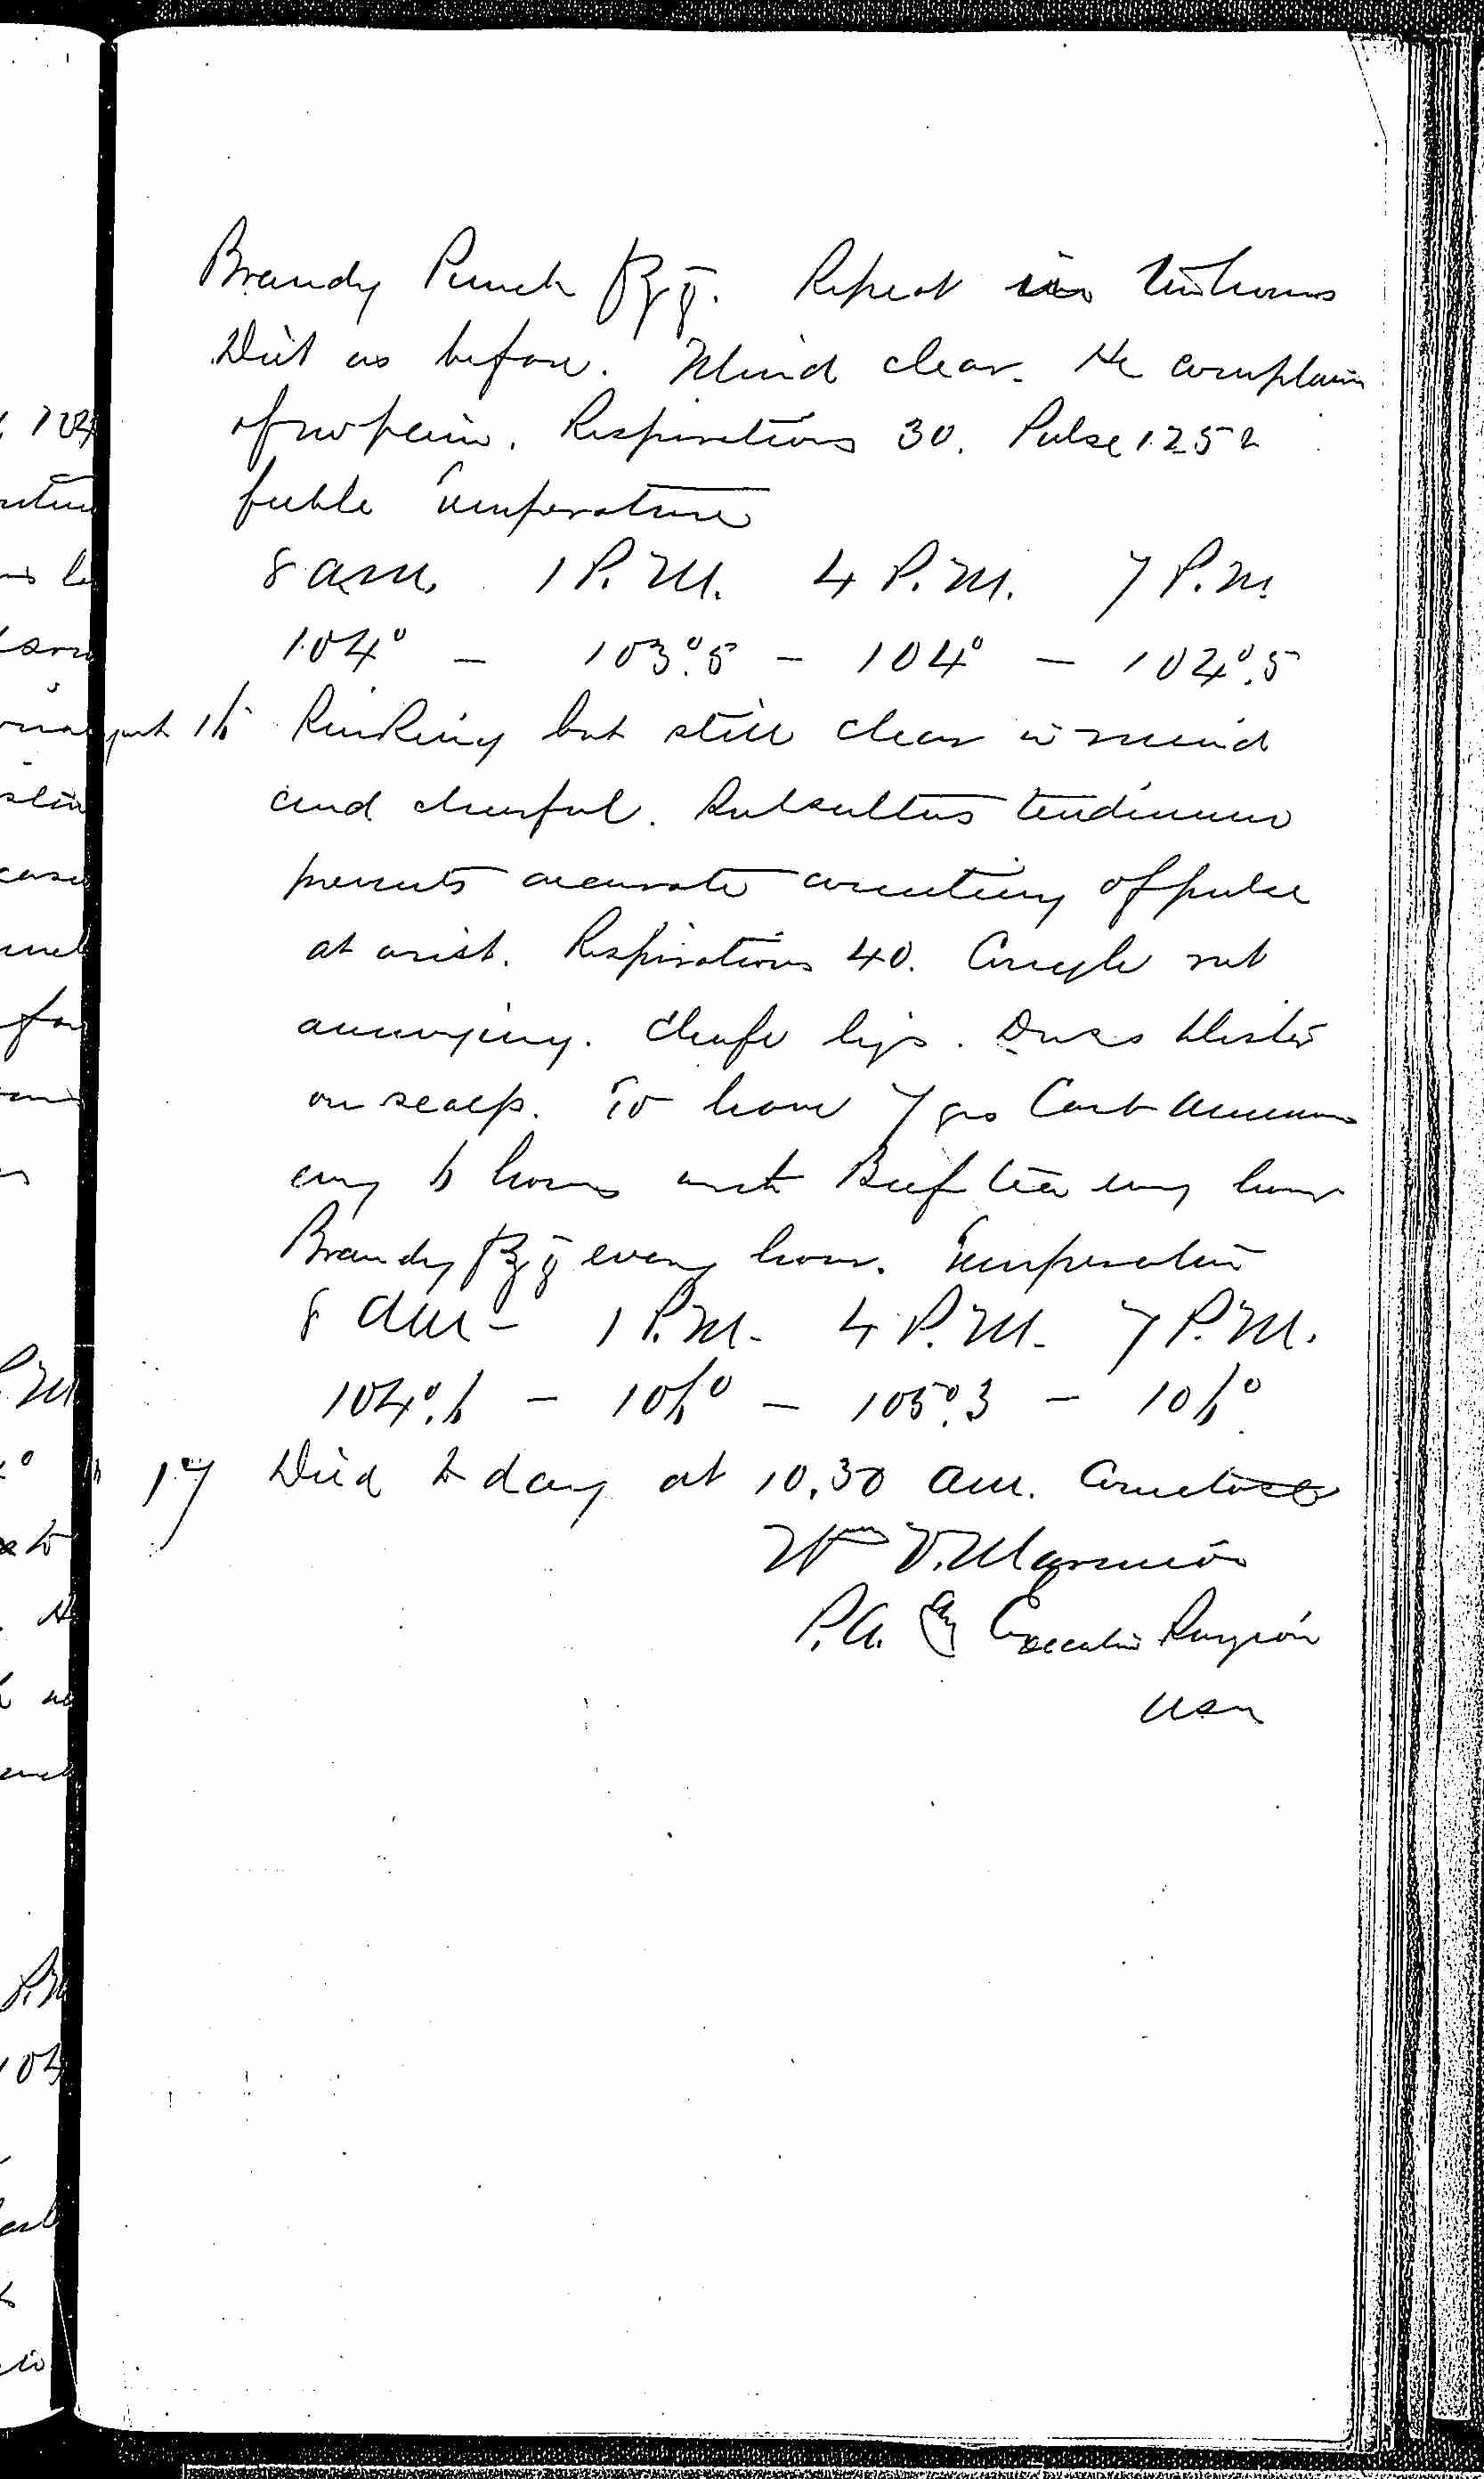 Entry for William Hack (page 7 of 7) in the log Hospital Tickets and Case Papers - Naval Hospital - Washington, D.C. - 1868-69